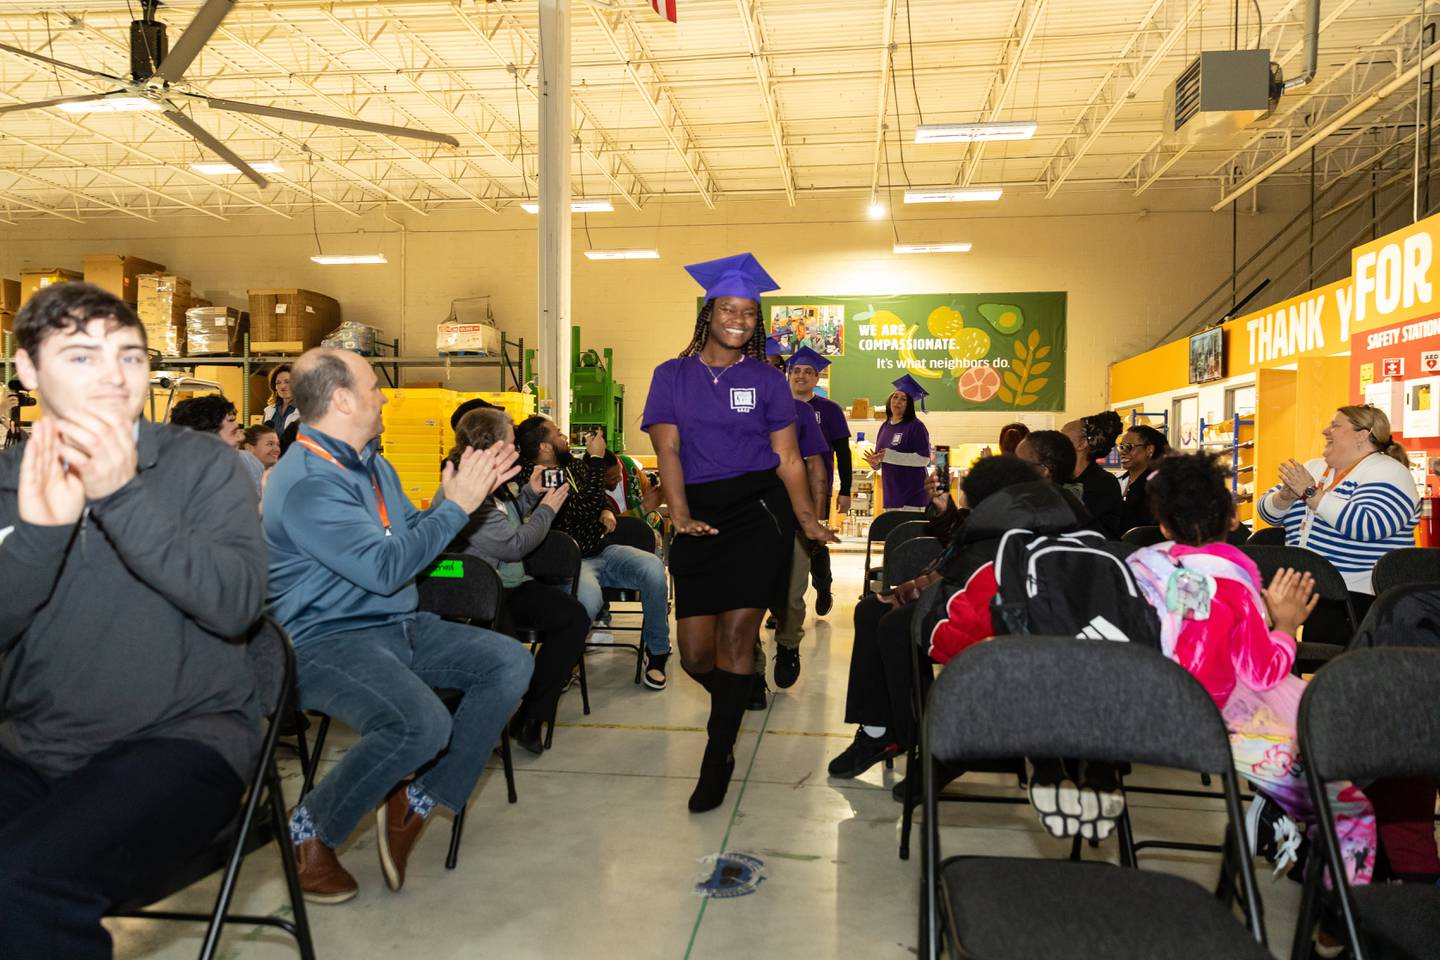 Connie Jackson leads the 'Pomp and Circumstance' procession during the S.E.E.D. graduation at the Northern Illinois Food Bank South Suburban Center in Joliet on March 14, 2024.